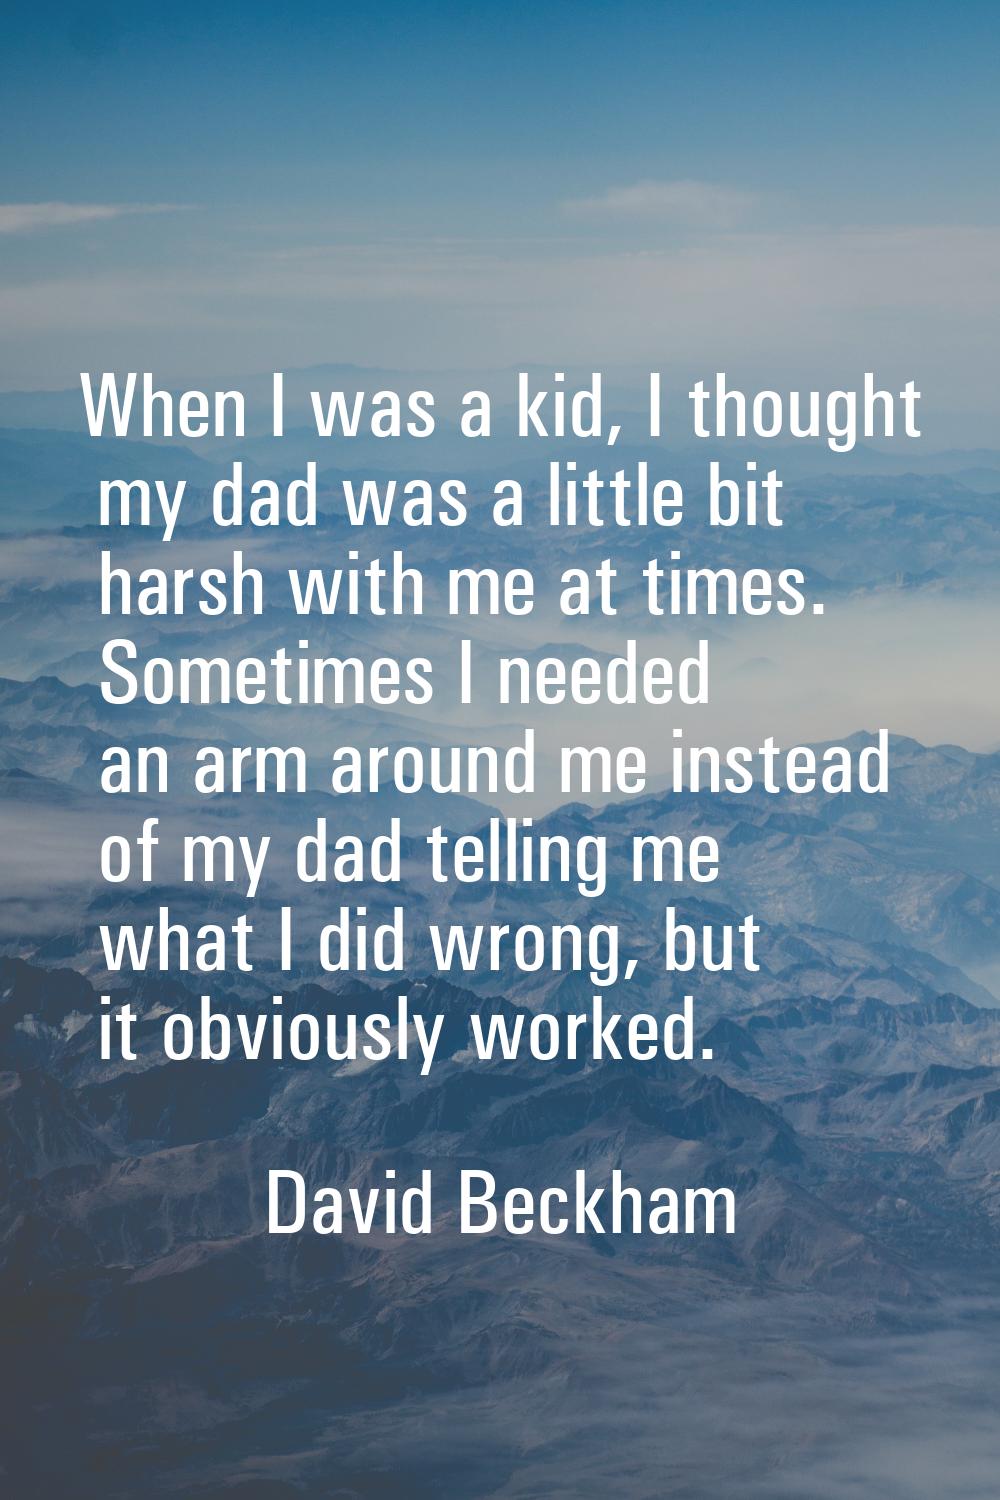 When I was a kid, I thought my dad was a little bit harsh with me at times. Sometimes I needed an a